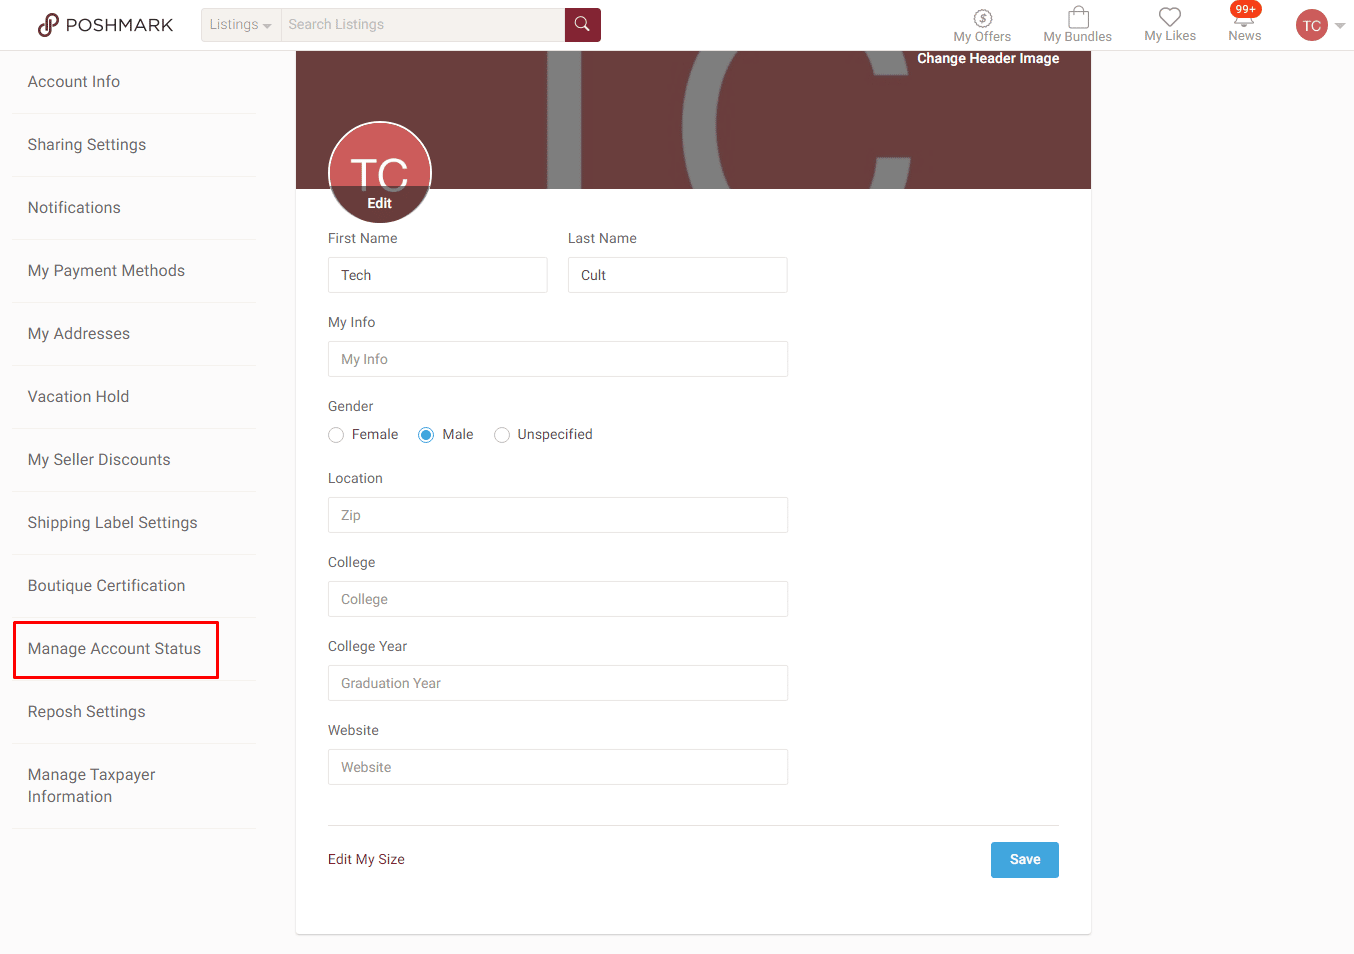 Click on Manage Account Status from the left pane